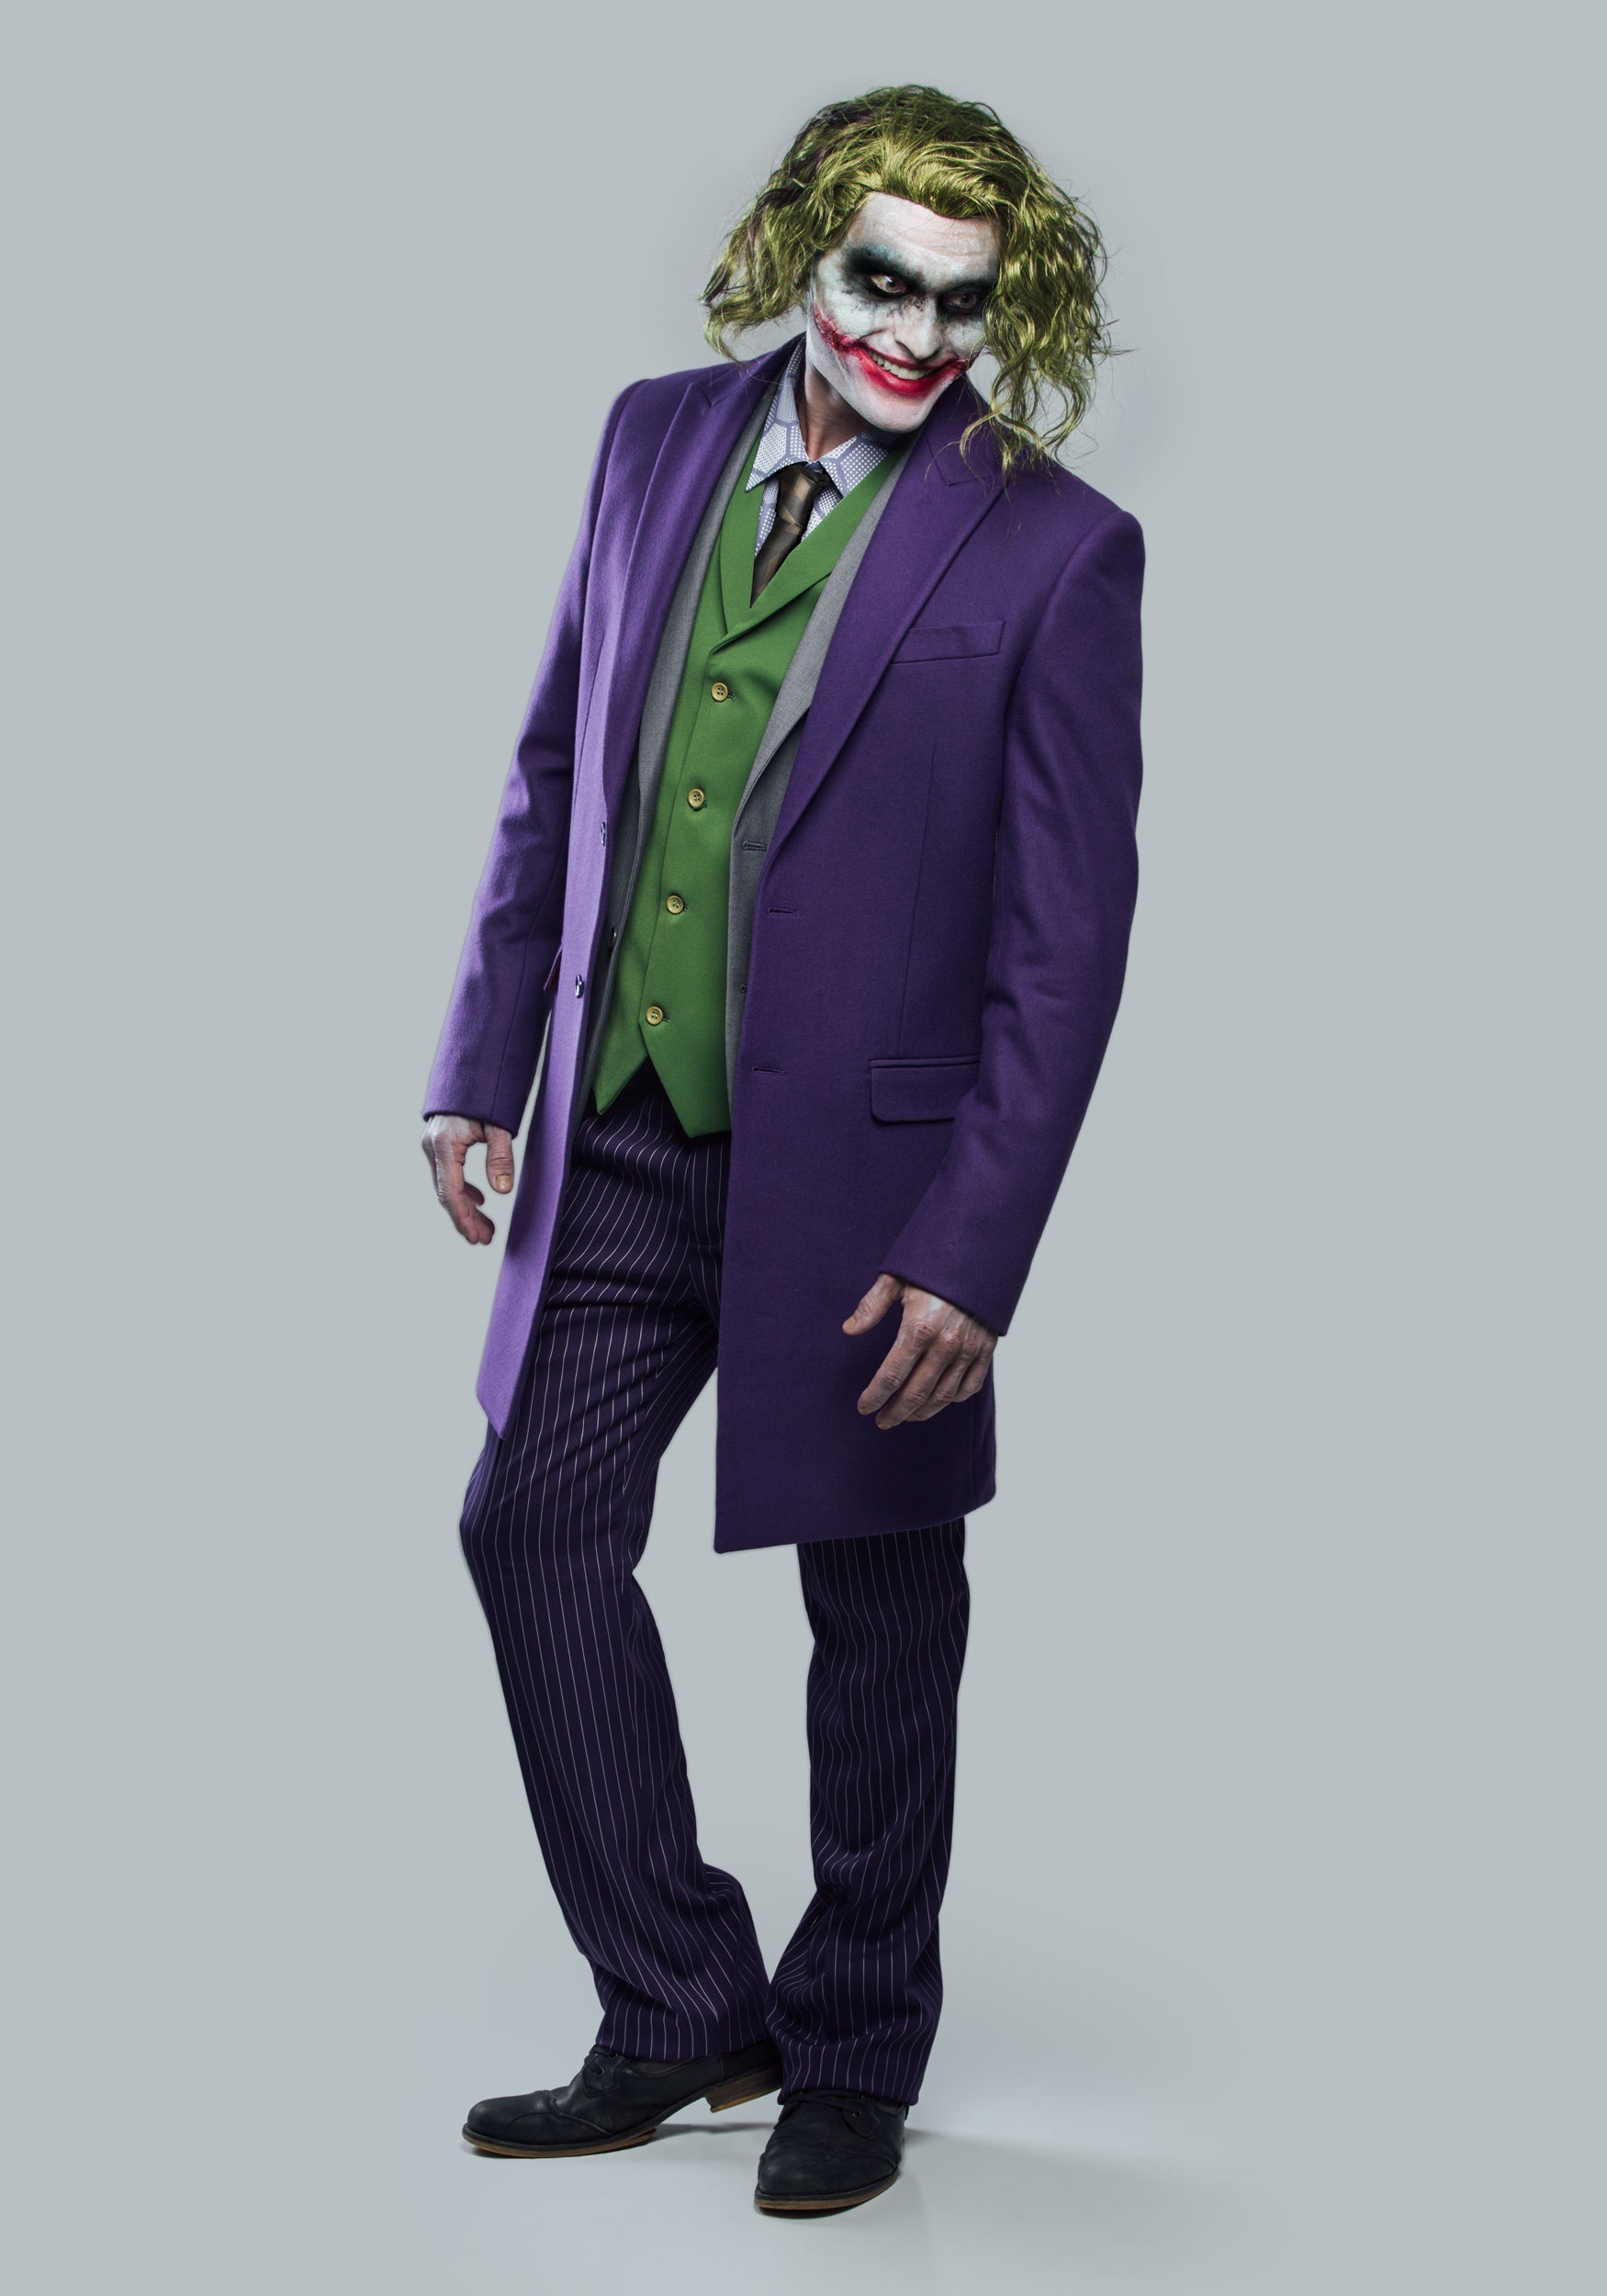 These Comic Book Formal Suits Are Wonderfully Bonkers